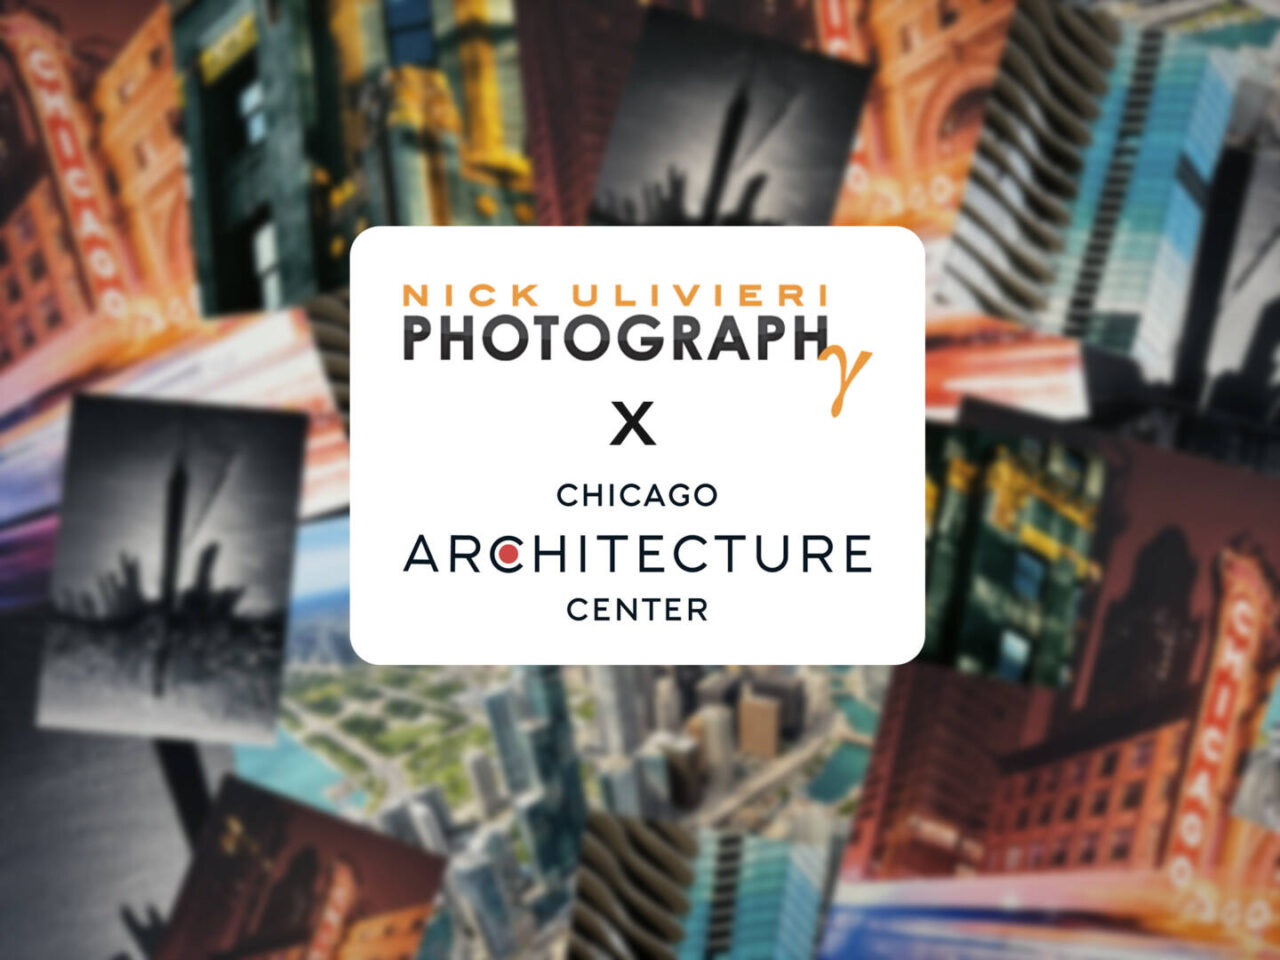 Nick Ulivieri Photography X Chicago Architecture Center